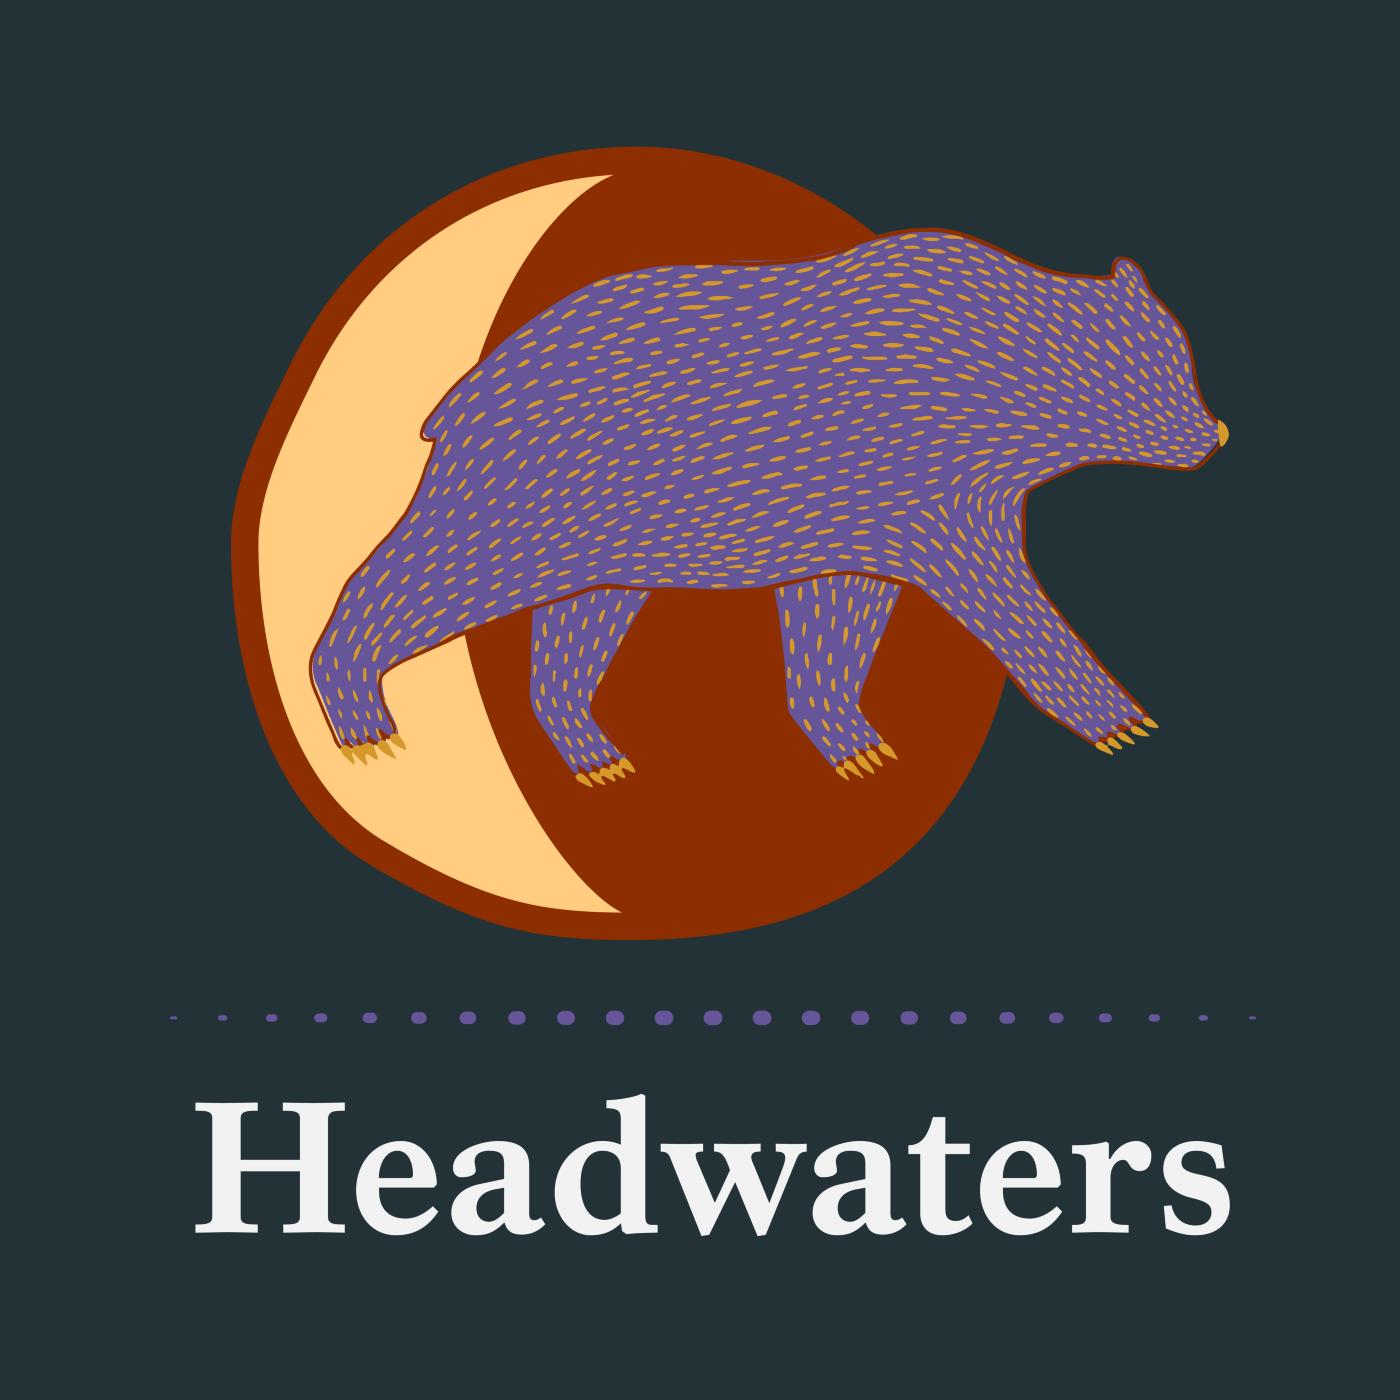 A graphic of a purple bear in front of a solid red circle with a yellow moon, with "Headwaters" text